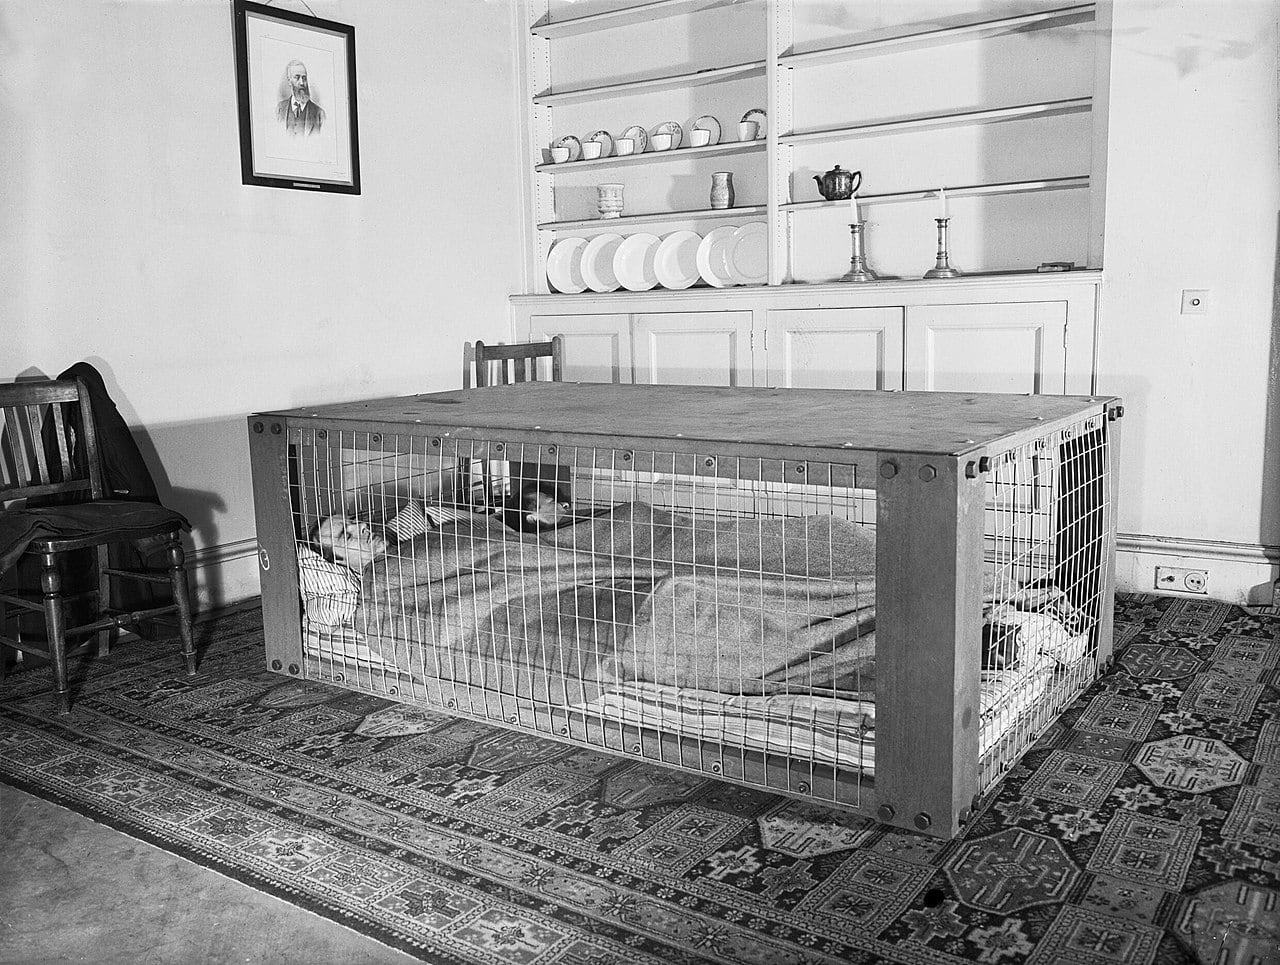 A British couple sleeps inside a “Morrison shelter” used as protection from collapsing homes during the WWII ‘Blitz’ bombing raids. March 1941